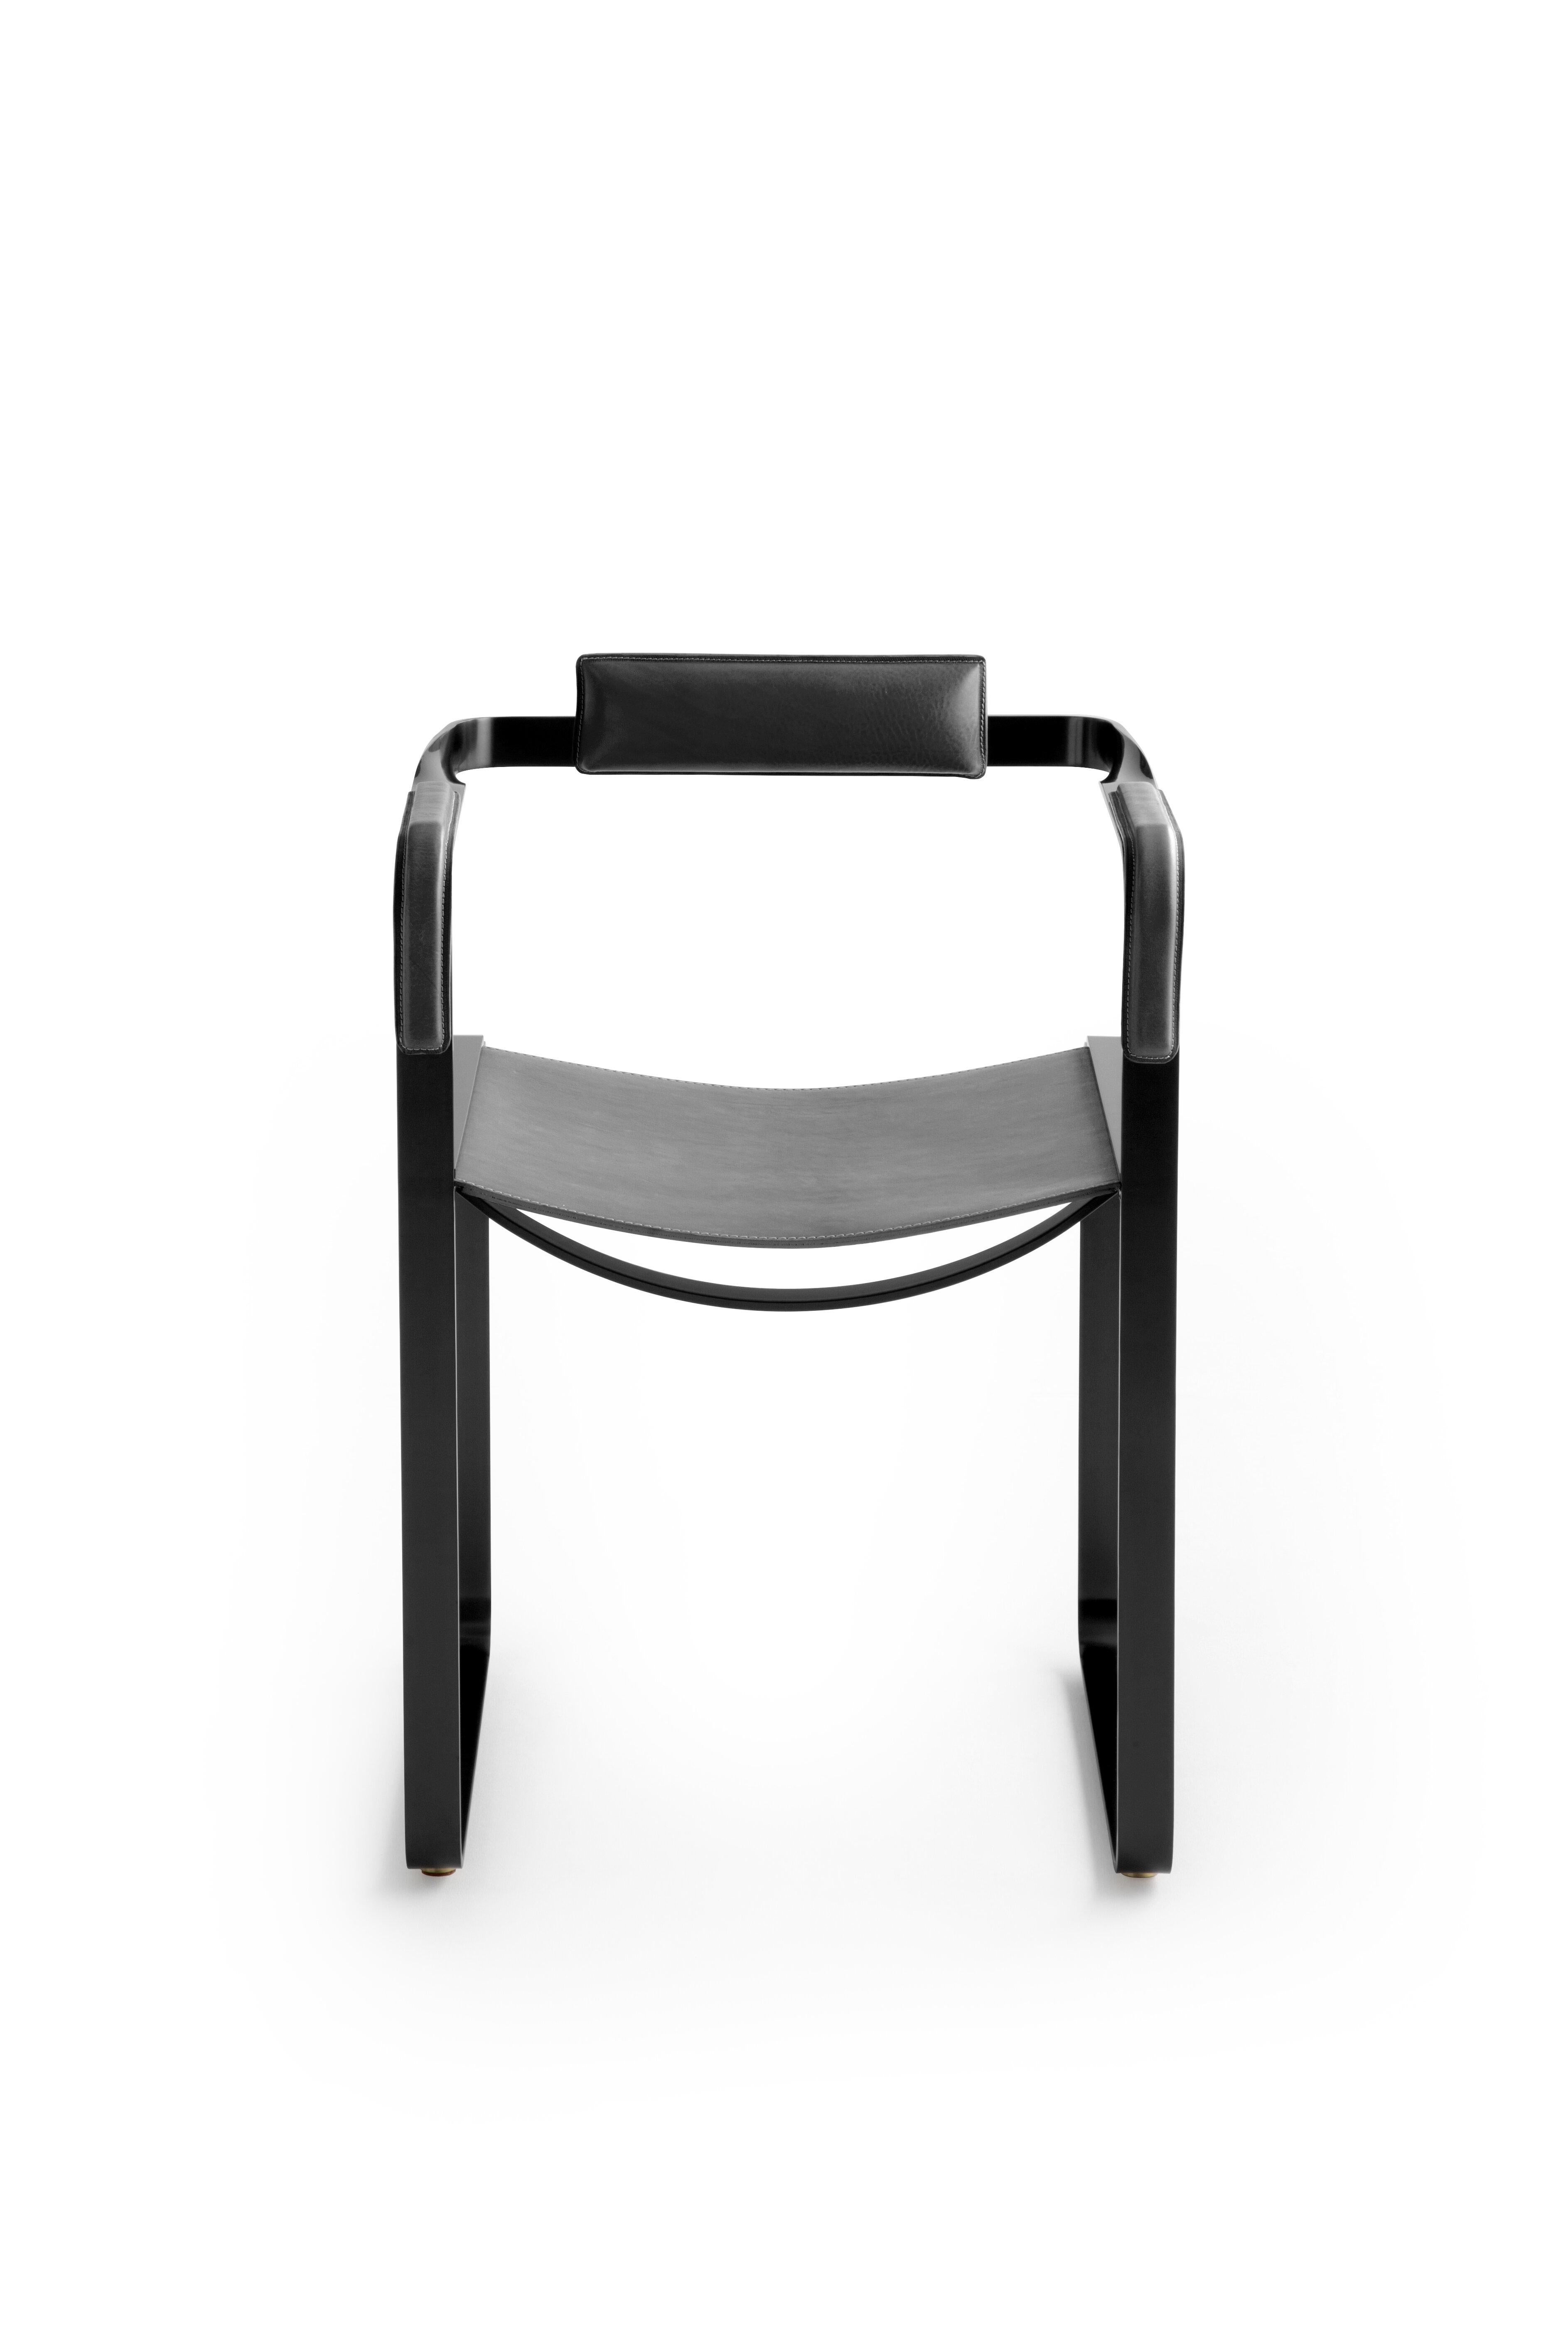 Minimalist Set of 3 Armchair, Black Smoke Steel and Black Leather, Contemporary Style For Sale